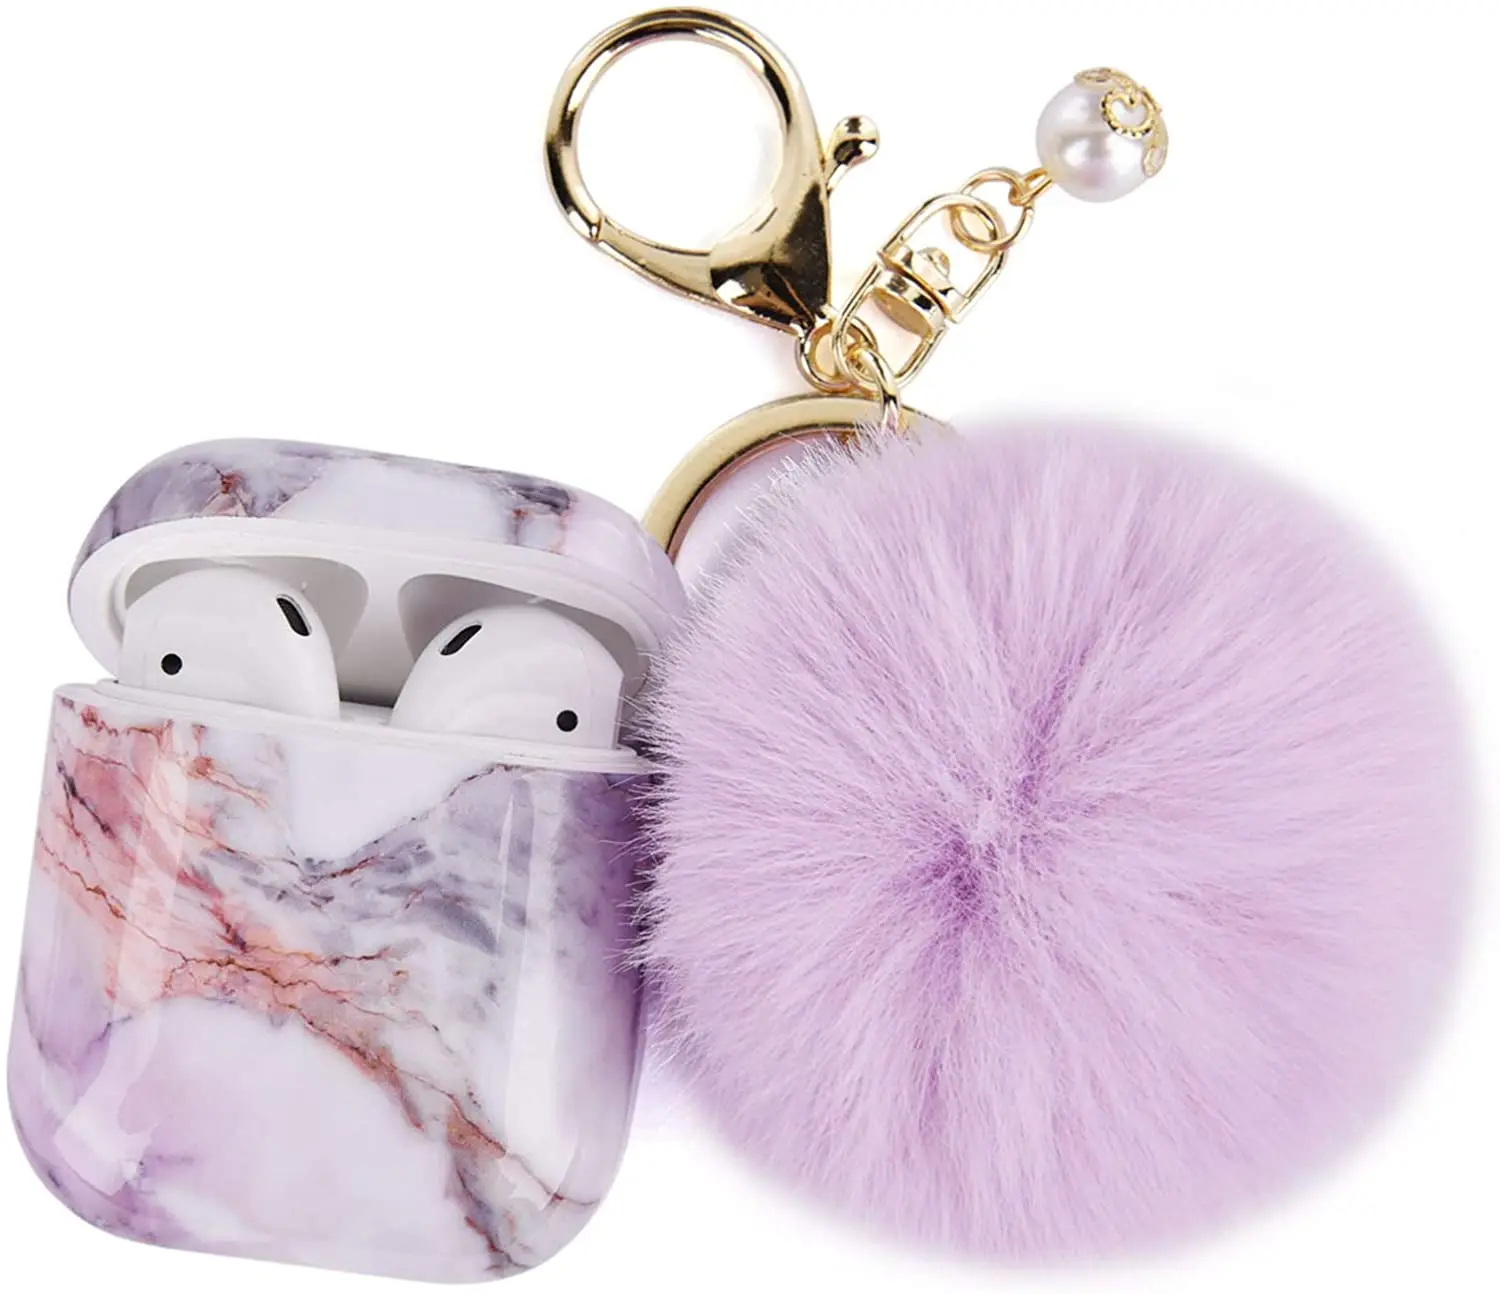 

Cute Air Pod Case Skins Protective TPU Case Cover with Fur Ball Keychain for Airpod 2/1 Earphones Charging Case Accessories